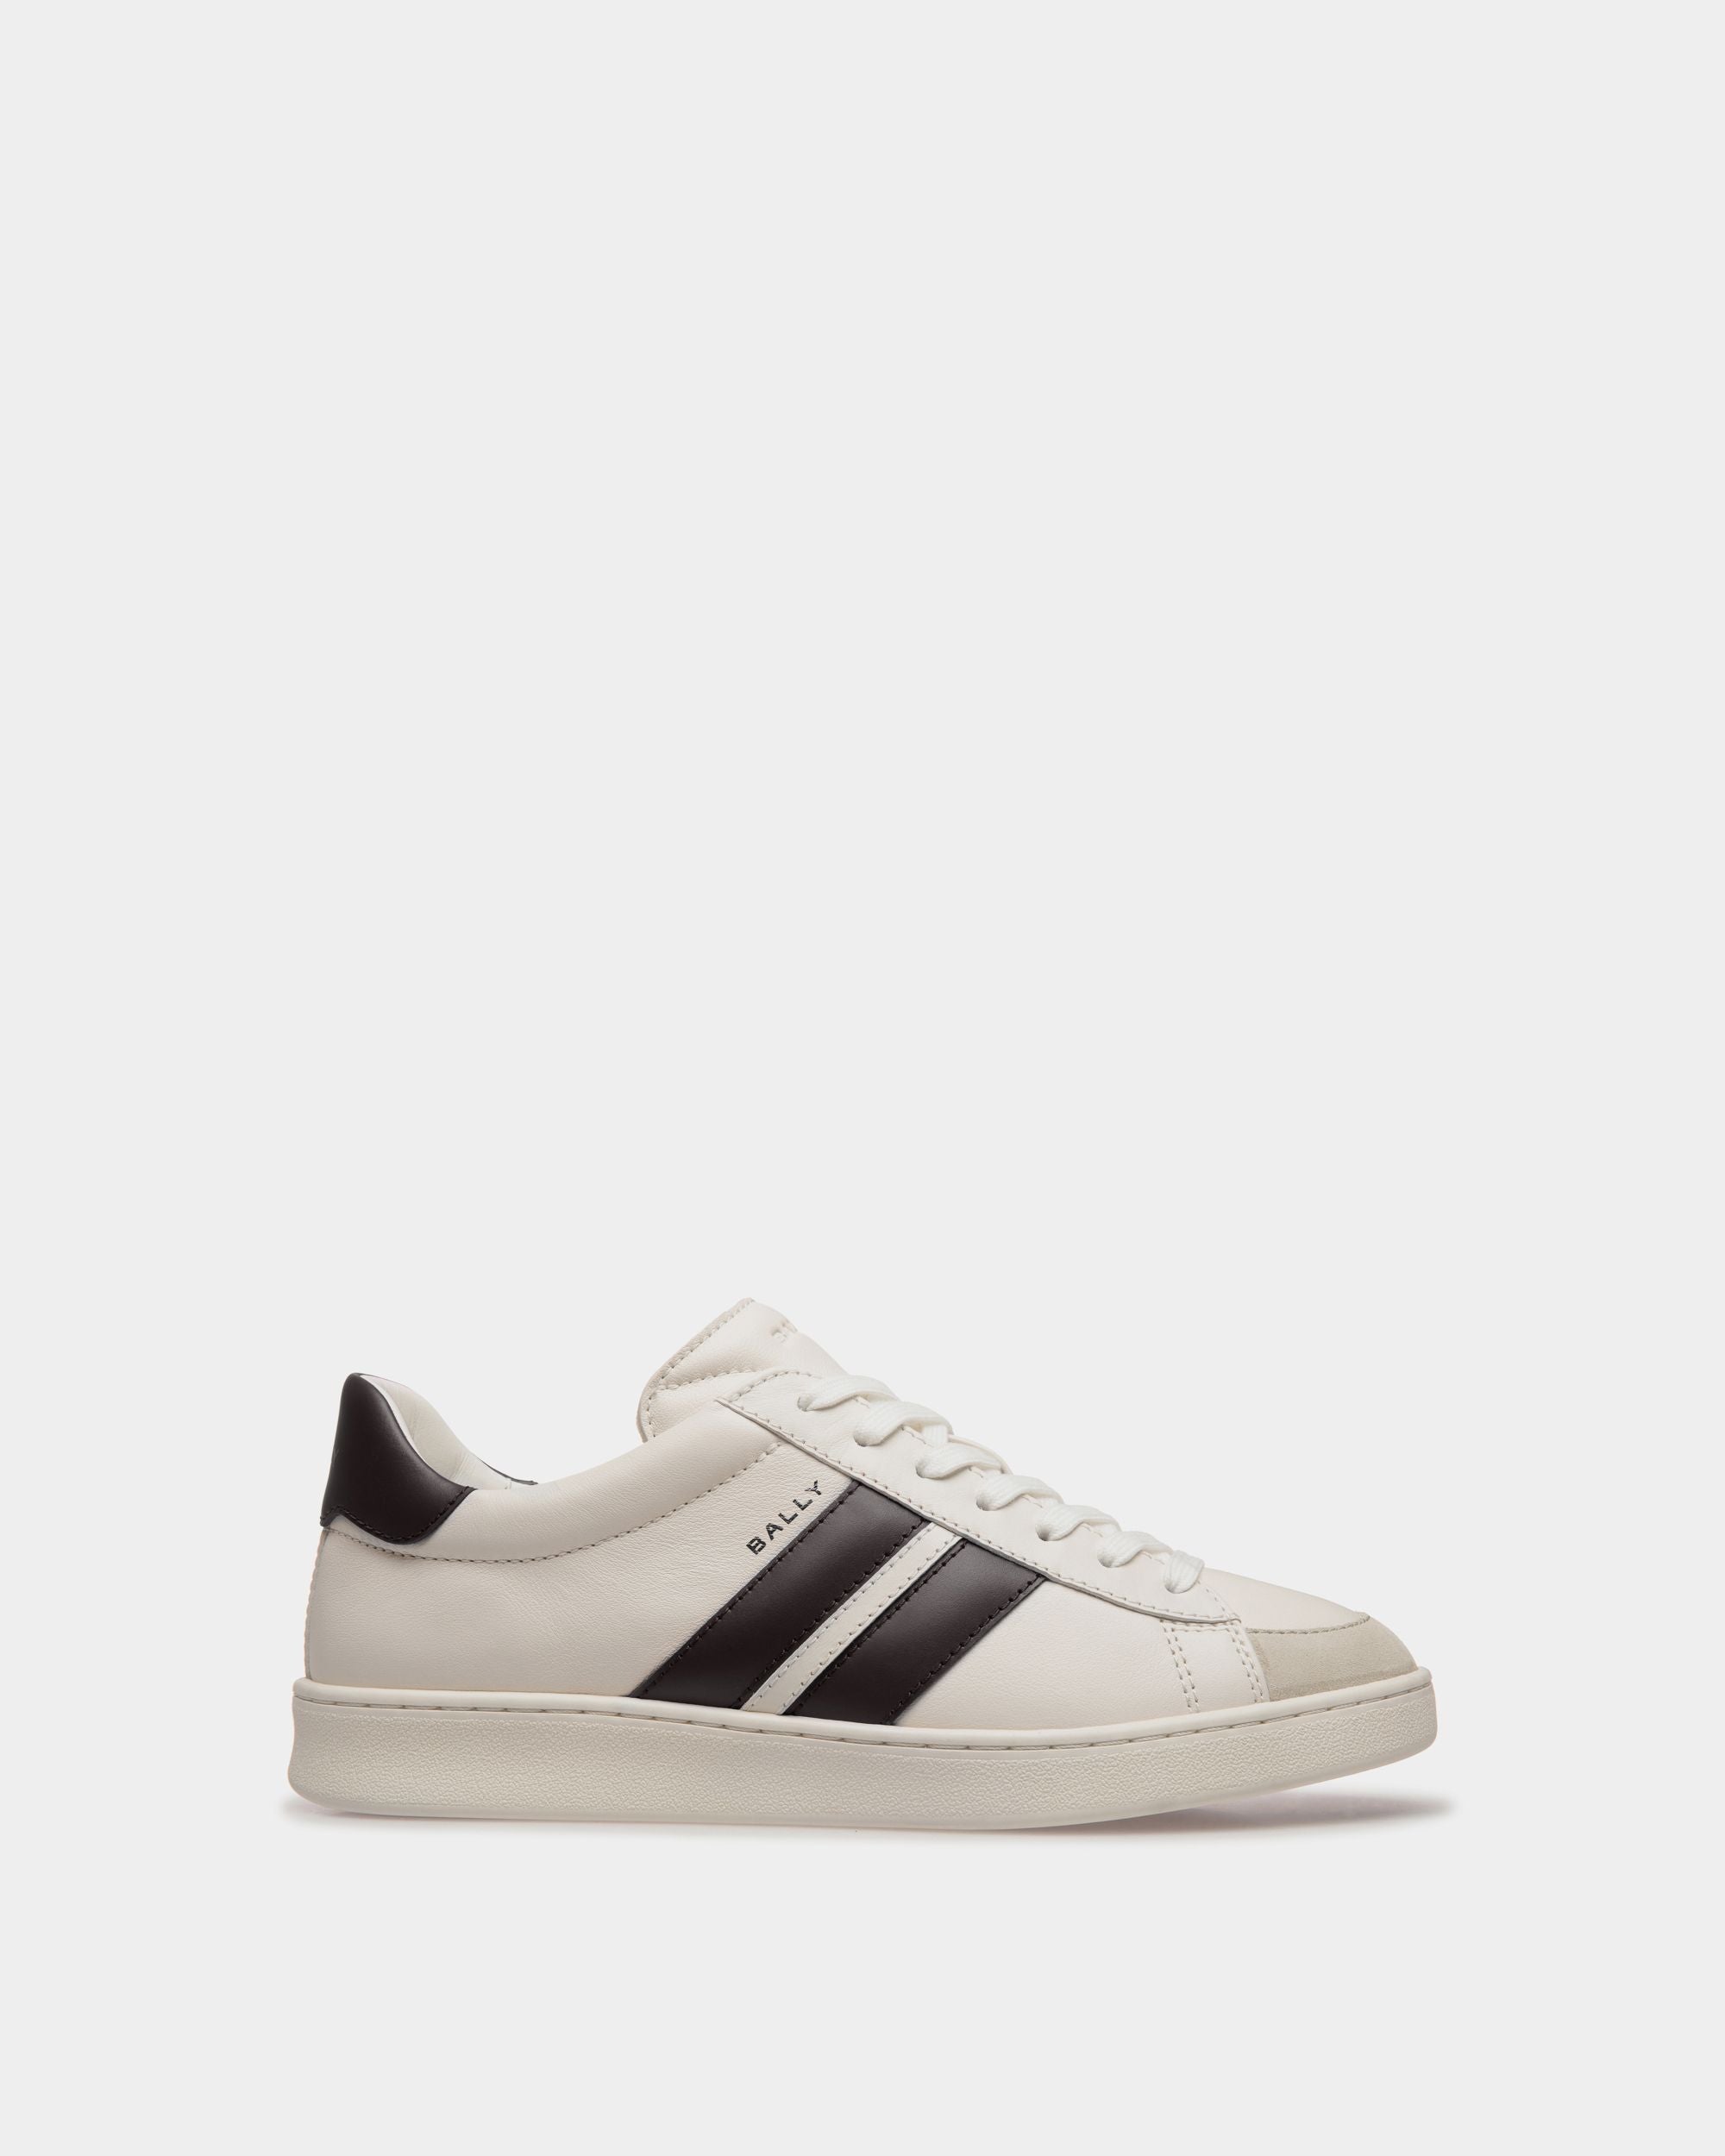 Tennis | Women's Sneaker in White and Black Leather | Bally | Still Life Side